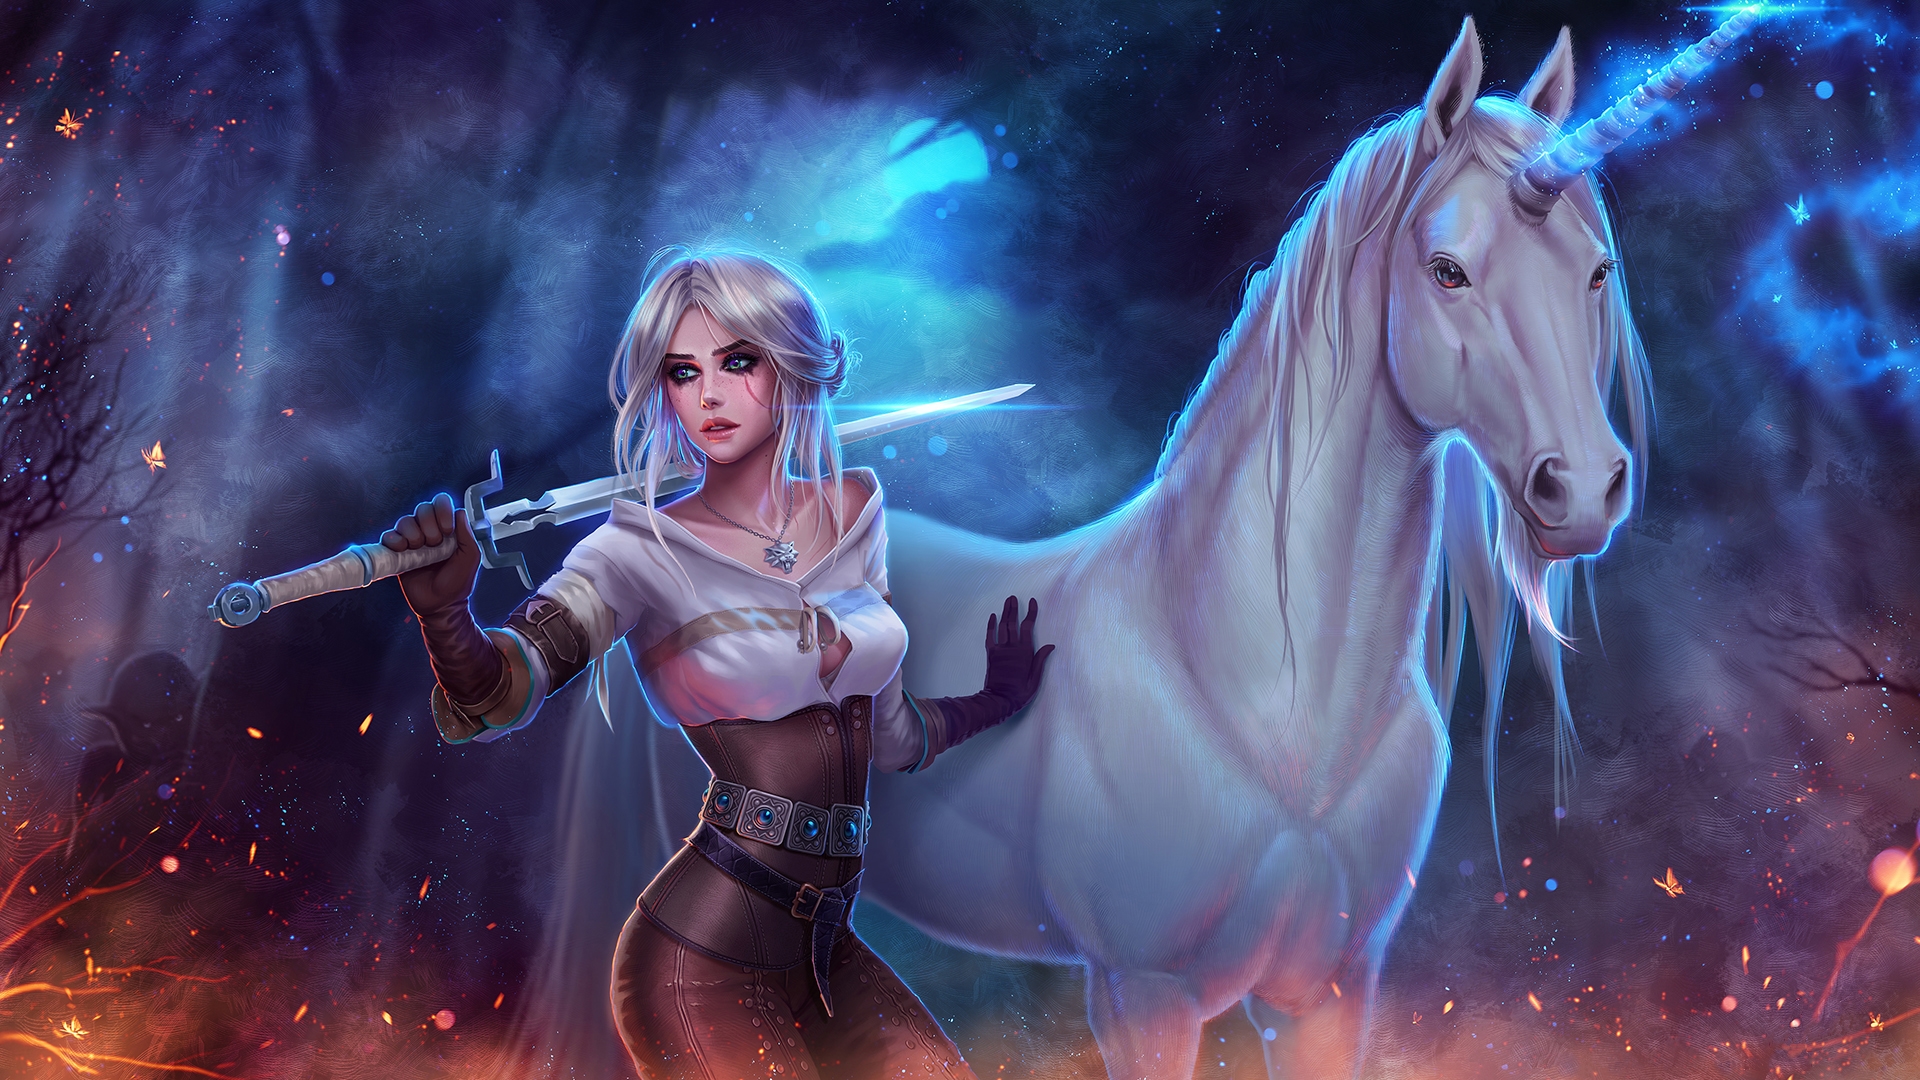 Wallpapers girl with a sword unicorn white horse on the desktop